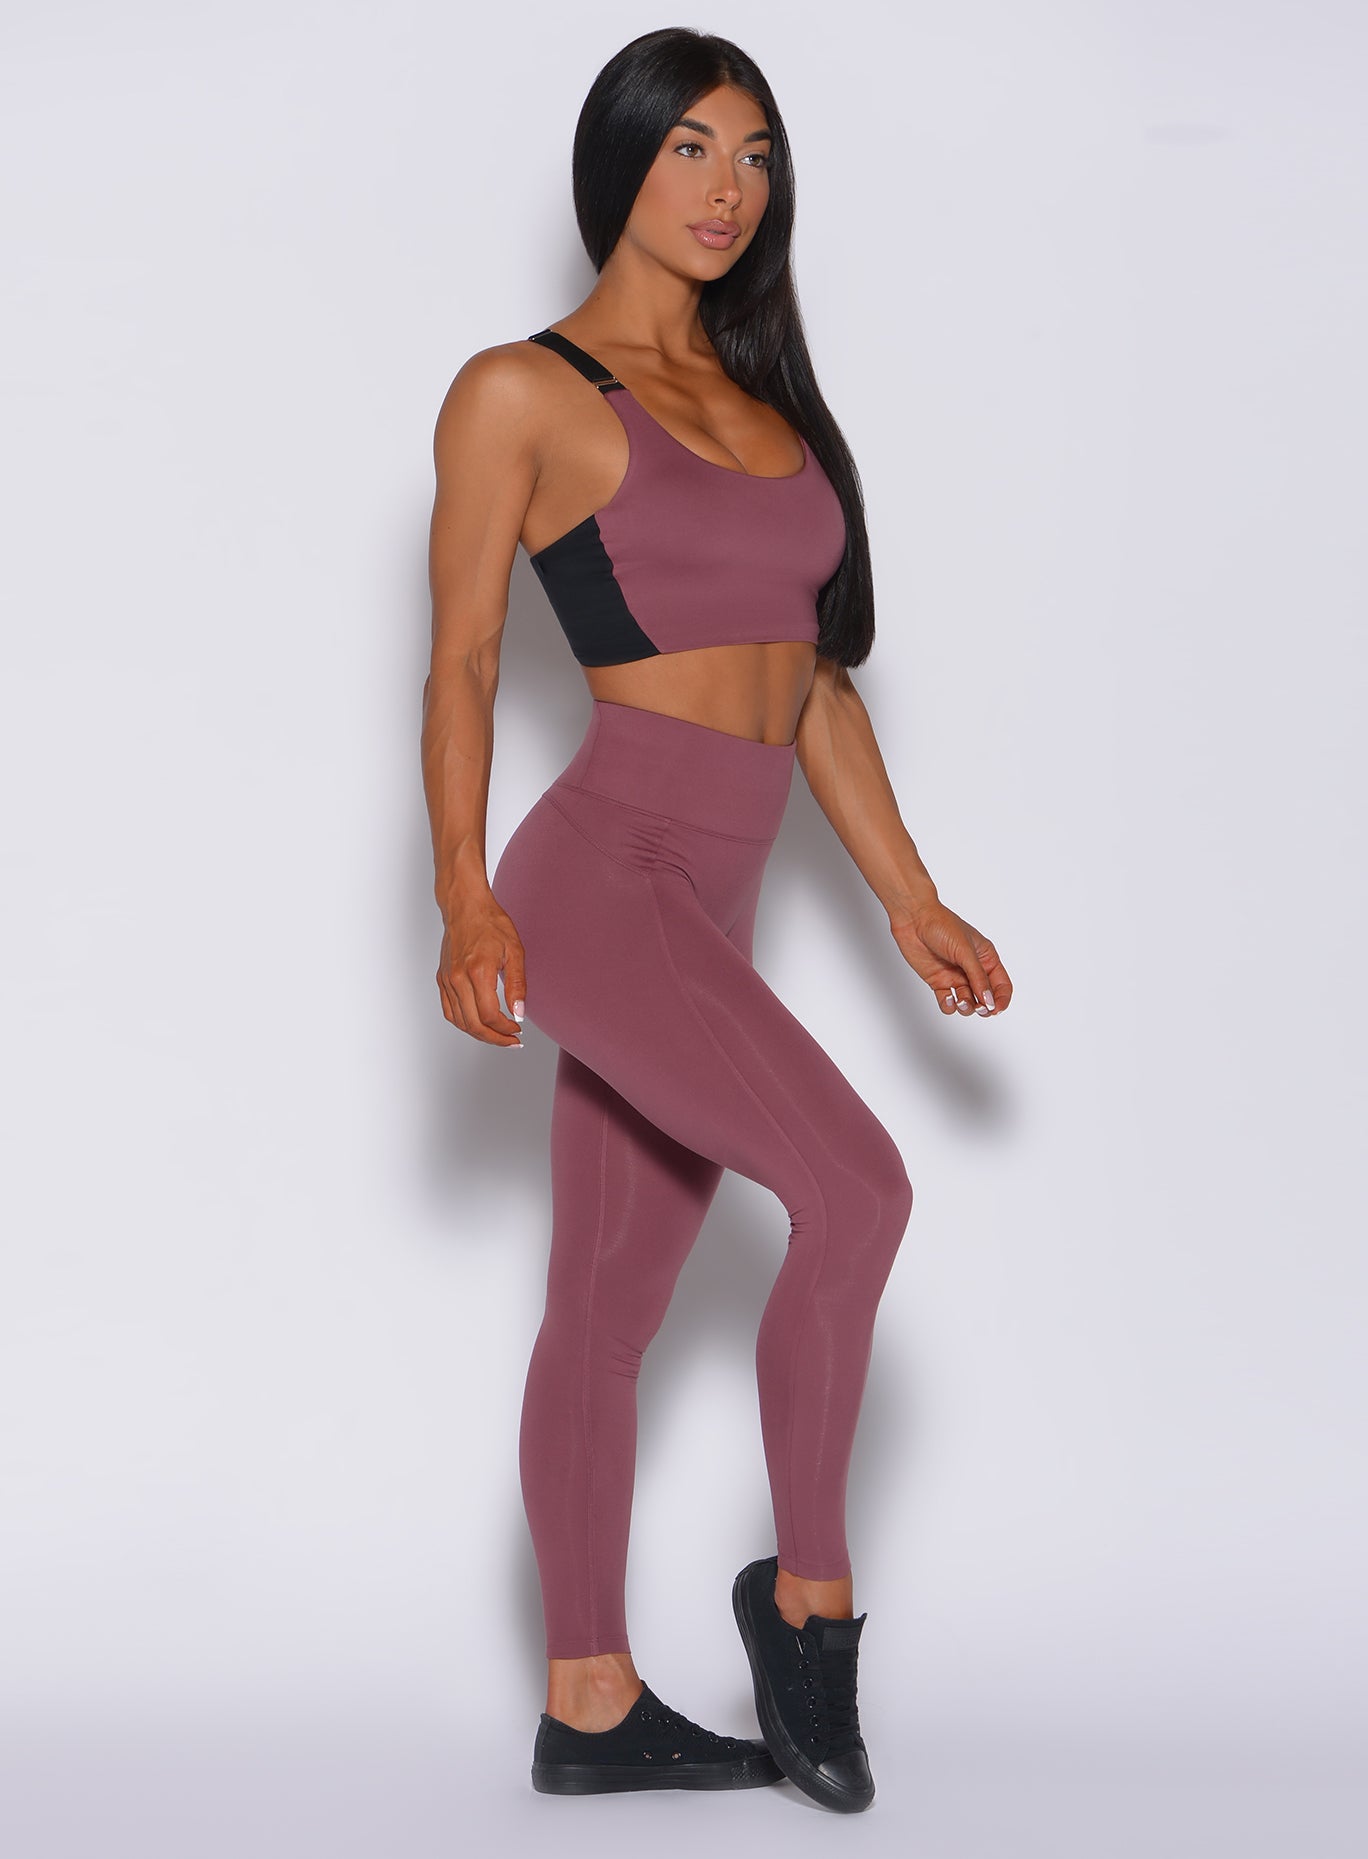 Right side profile view of a model wearing our snatched waist leggings in merlot color and a matching bra